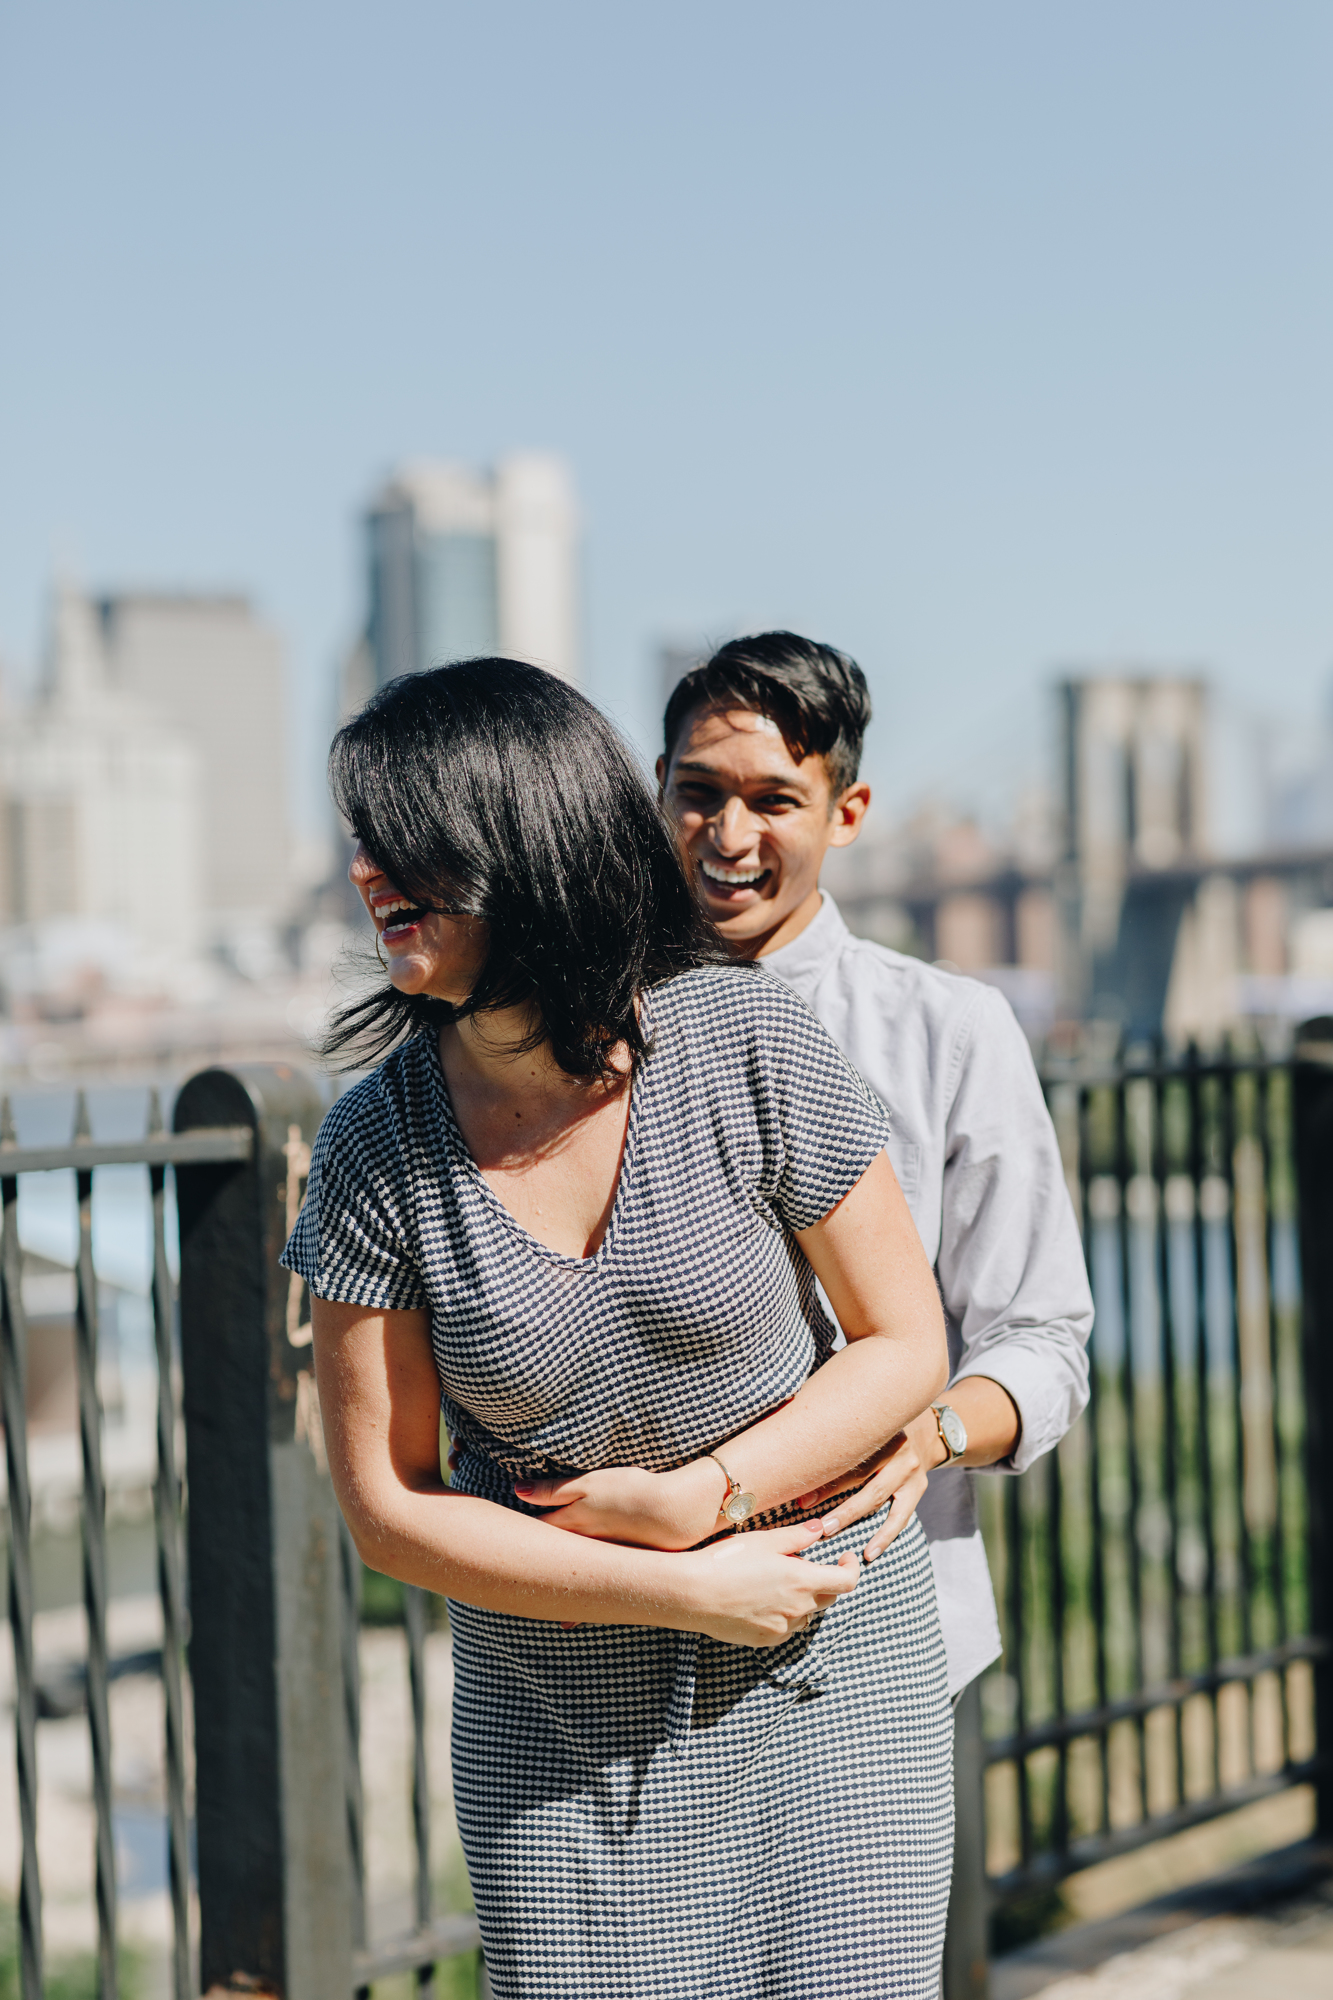 Charming Brooklyn Heights Promenade Engagement Photos in Summery New York